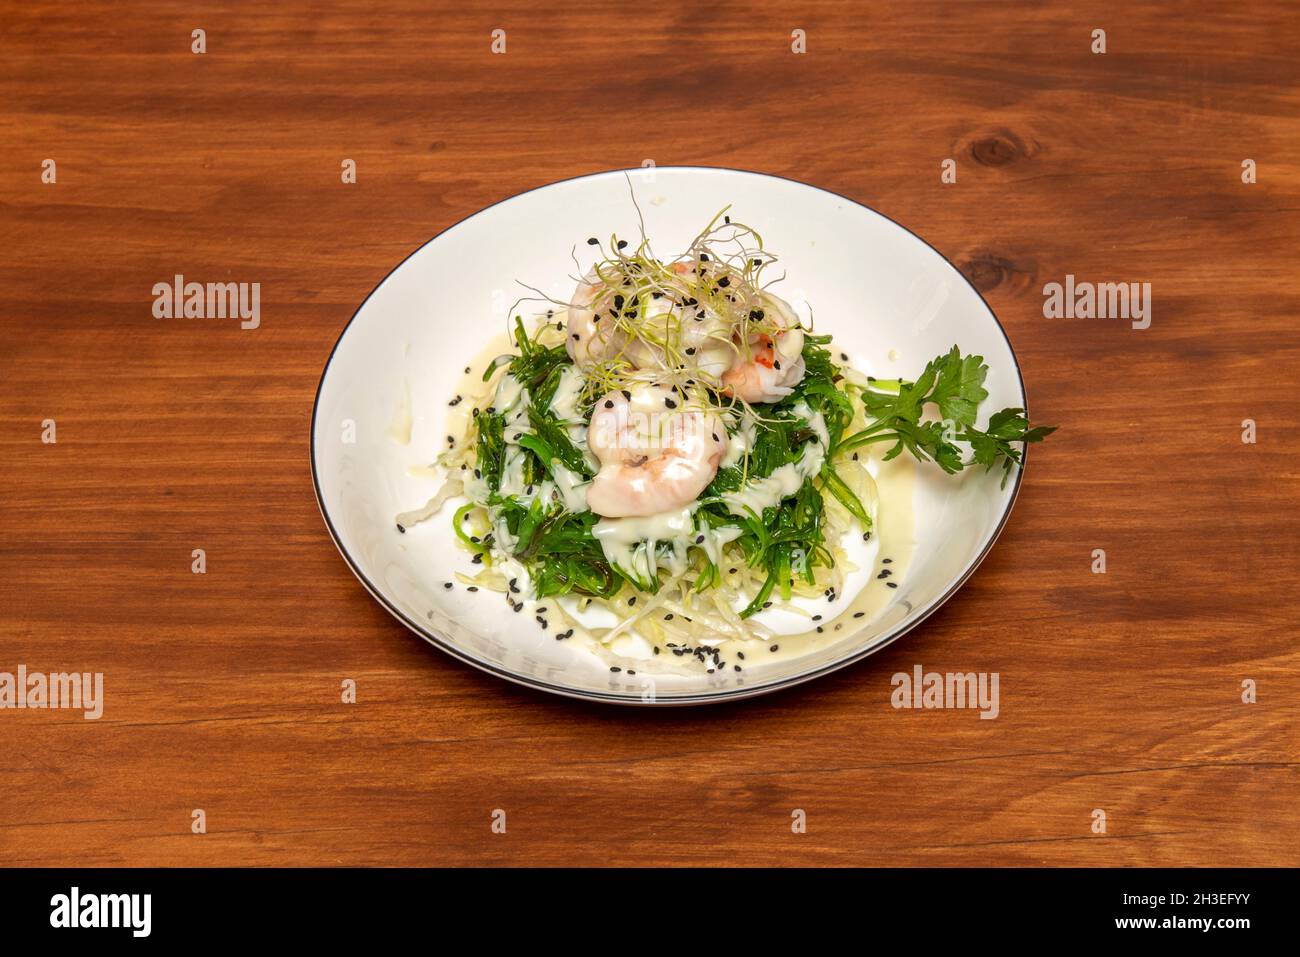 Japanese Wakame Seaweed Salad With Shrimp Parsley Poppy Seeds And Asian Sauce With Bean Sprouts Stock Photo Alamy